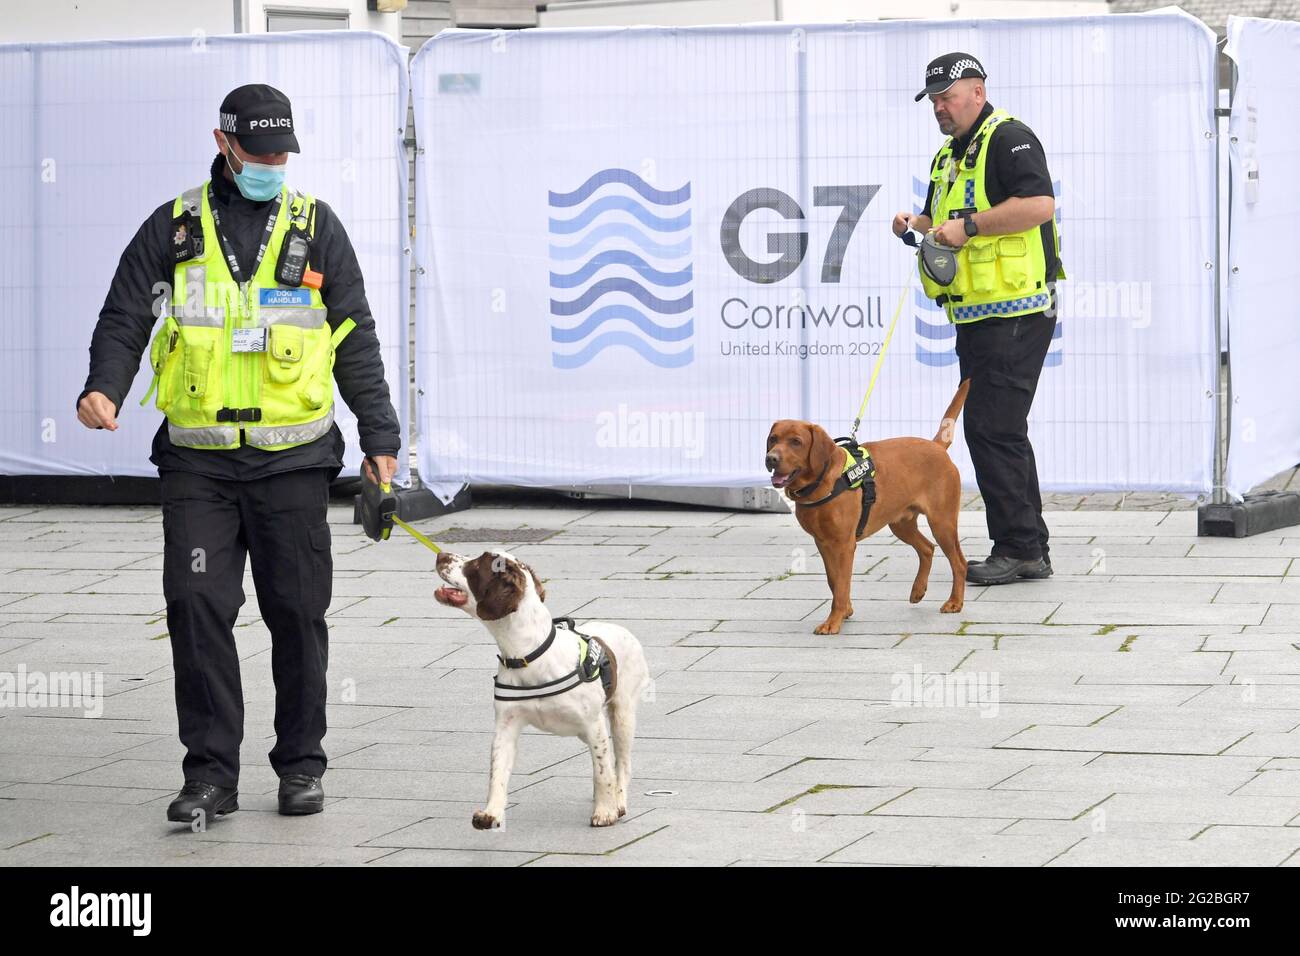 Police dogs with handlers at the G7 media centre in Falmouth, ahead of the G7 summit in Cornwall. Picture date: Thursday June 10, 2021. Stock Photo